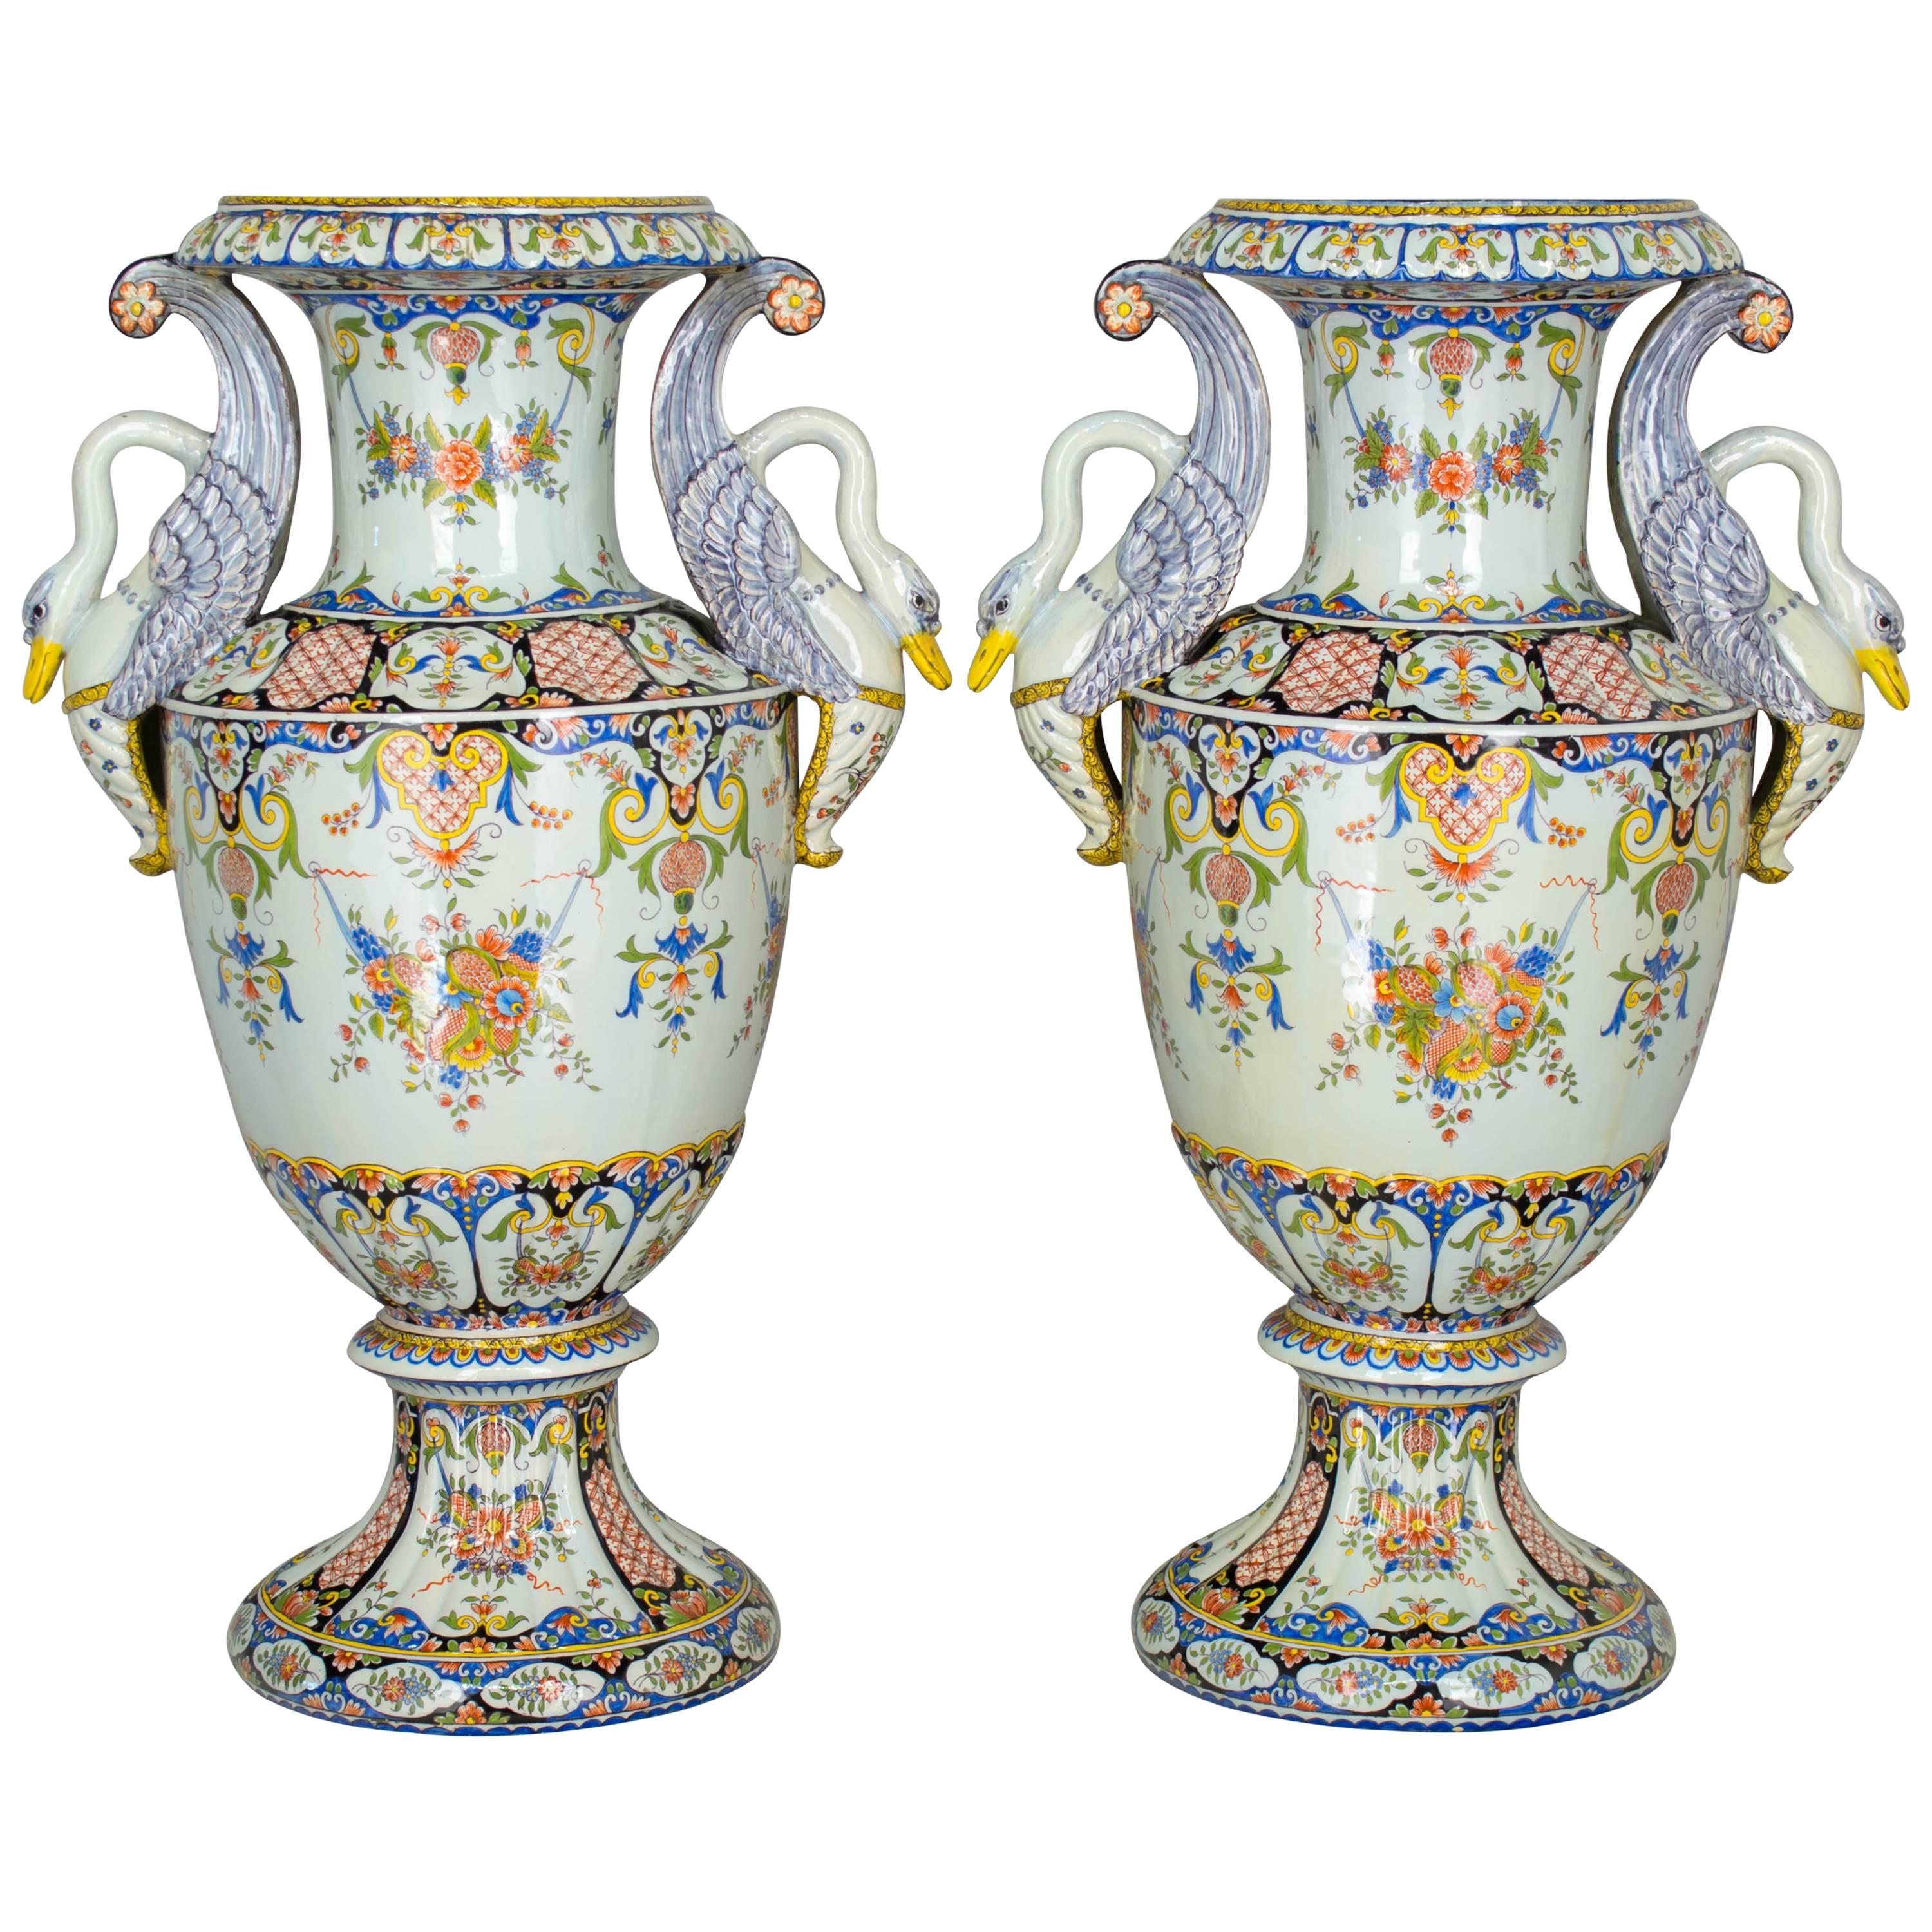 Pair of Large 19th Century French Faience Urns